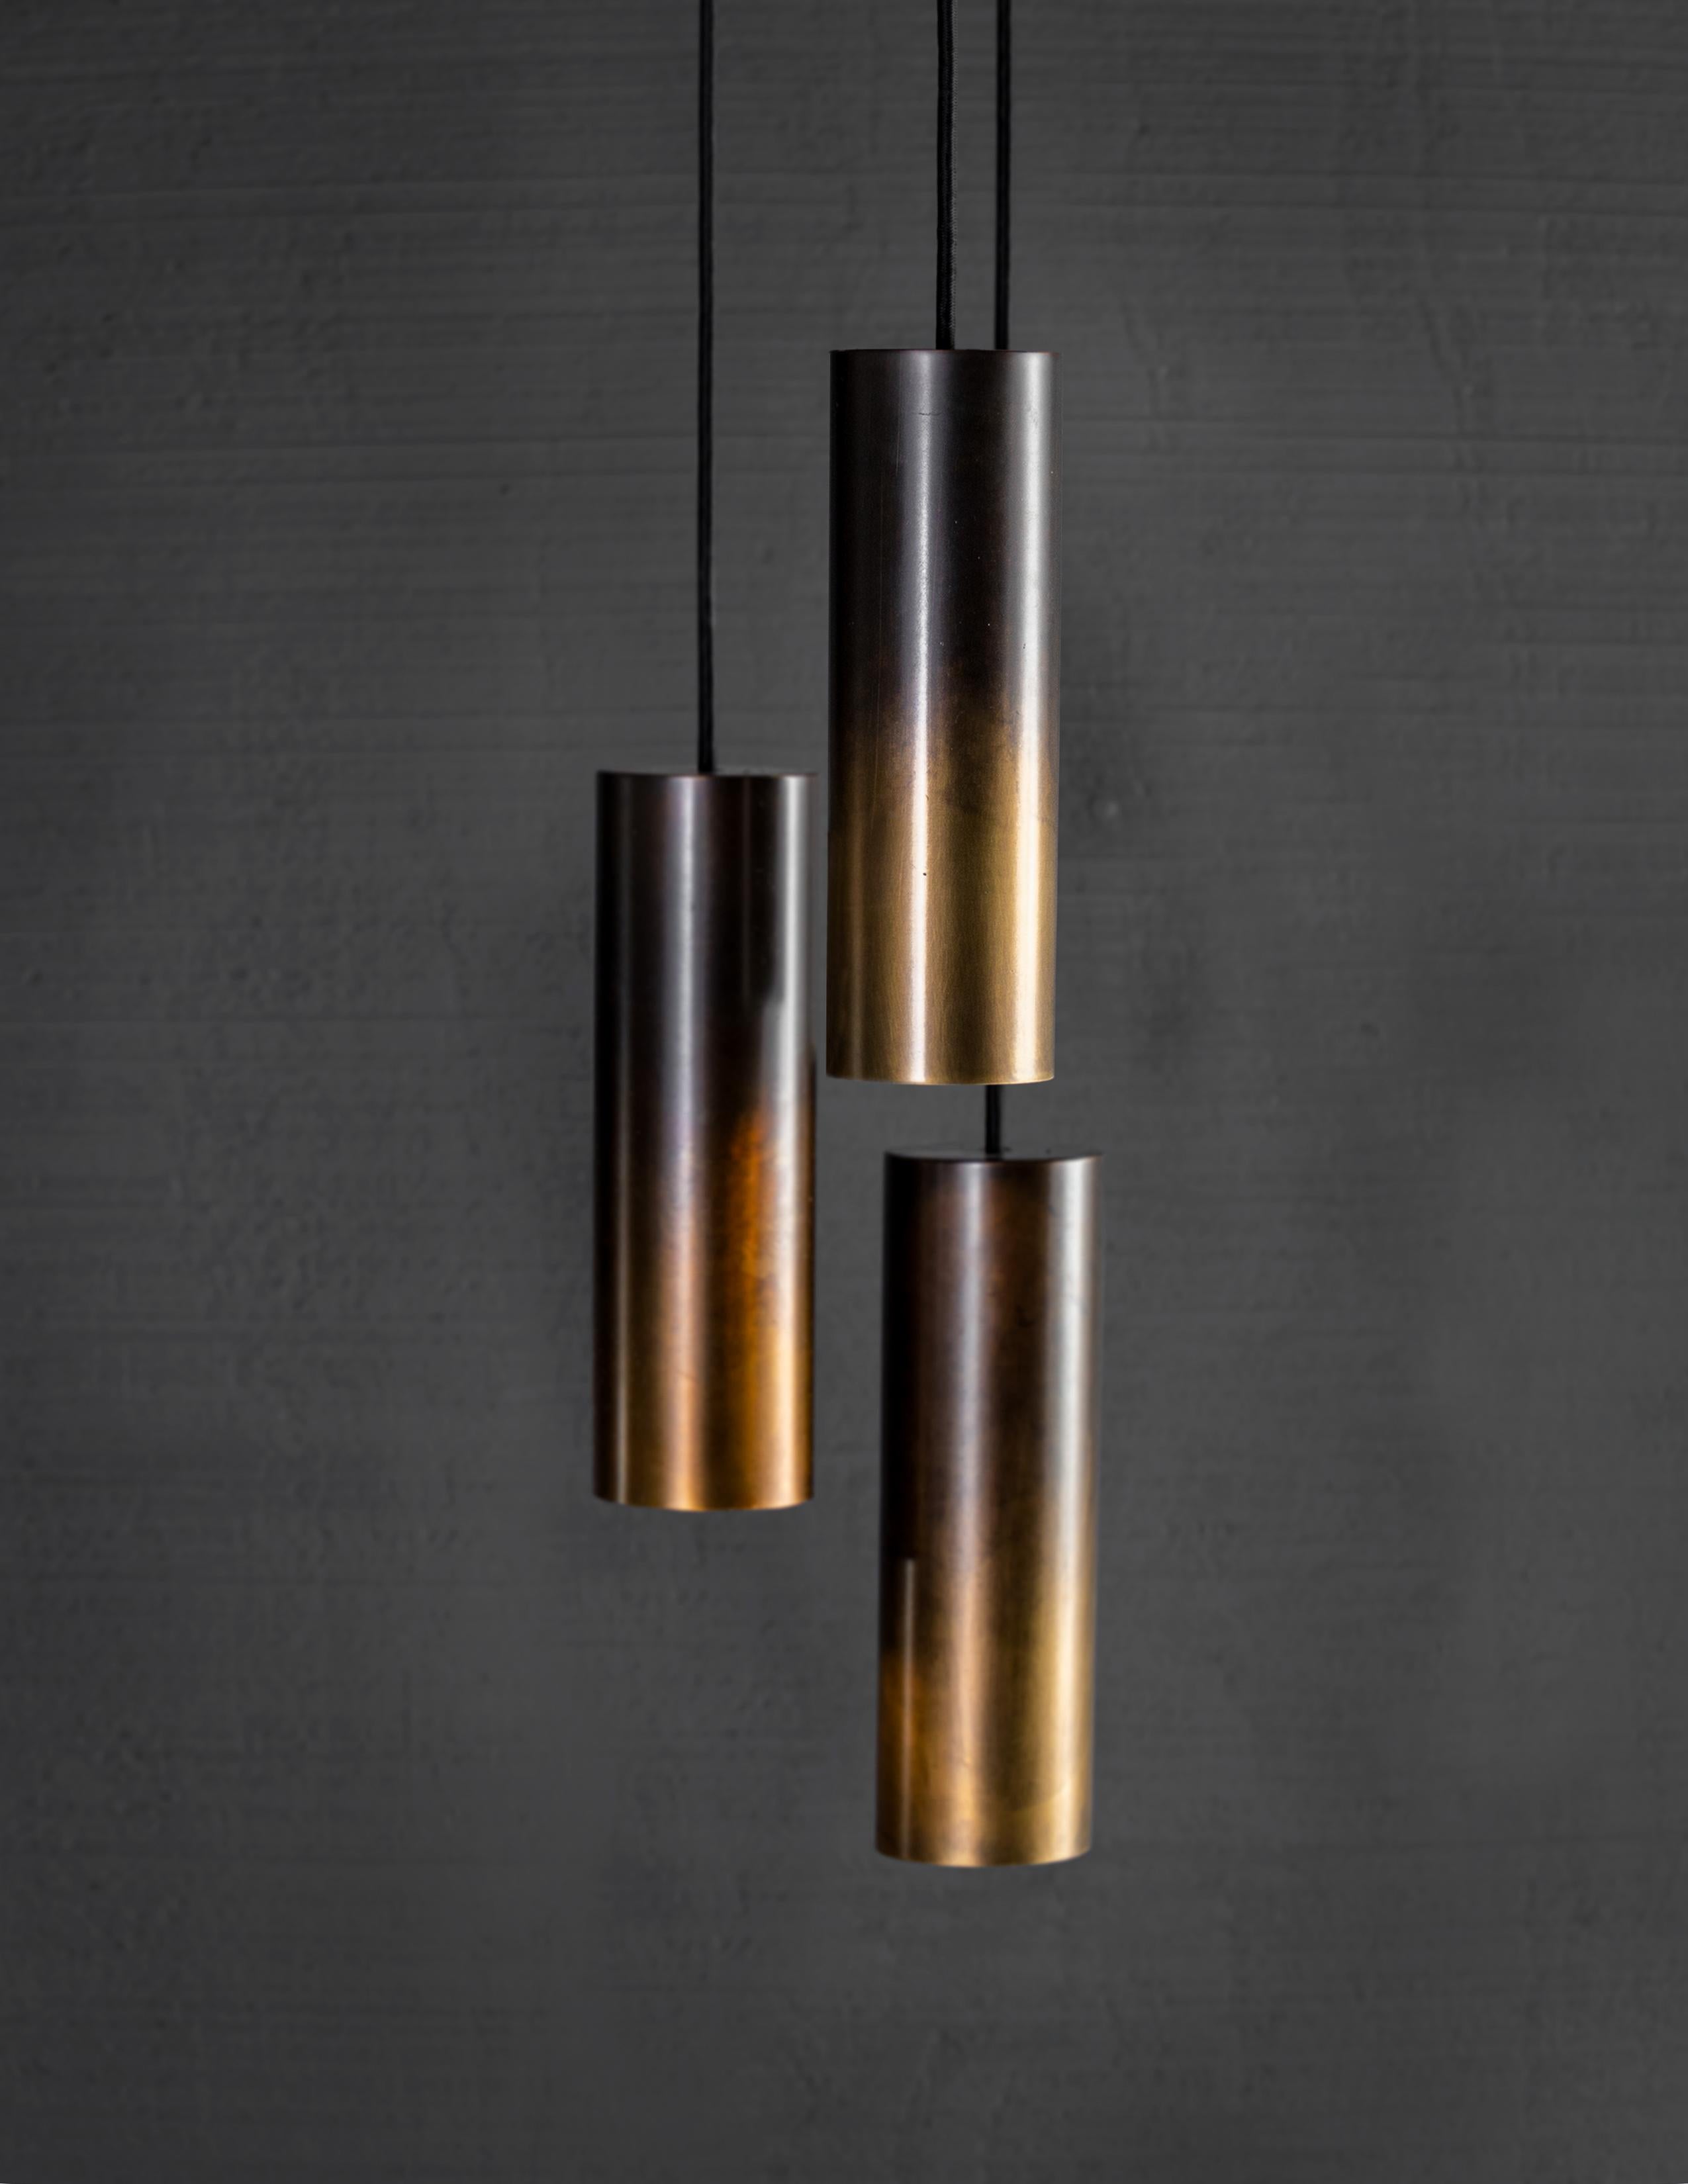 Brass tubular shaped light fixture. 

Bulb 1x medium base 60 watt incandescent. 5lbs

Handcrafted in Italy. Sold exclusively by Brendan Bass.

Measures: Minimum hanging height: N/A
Maximum hanging height: 68